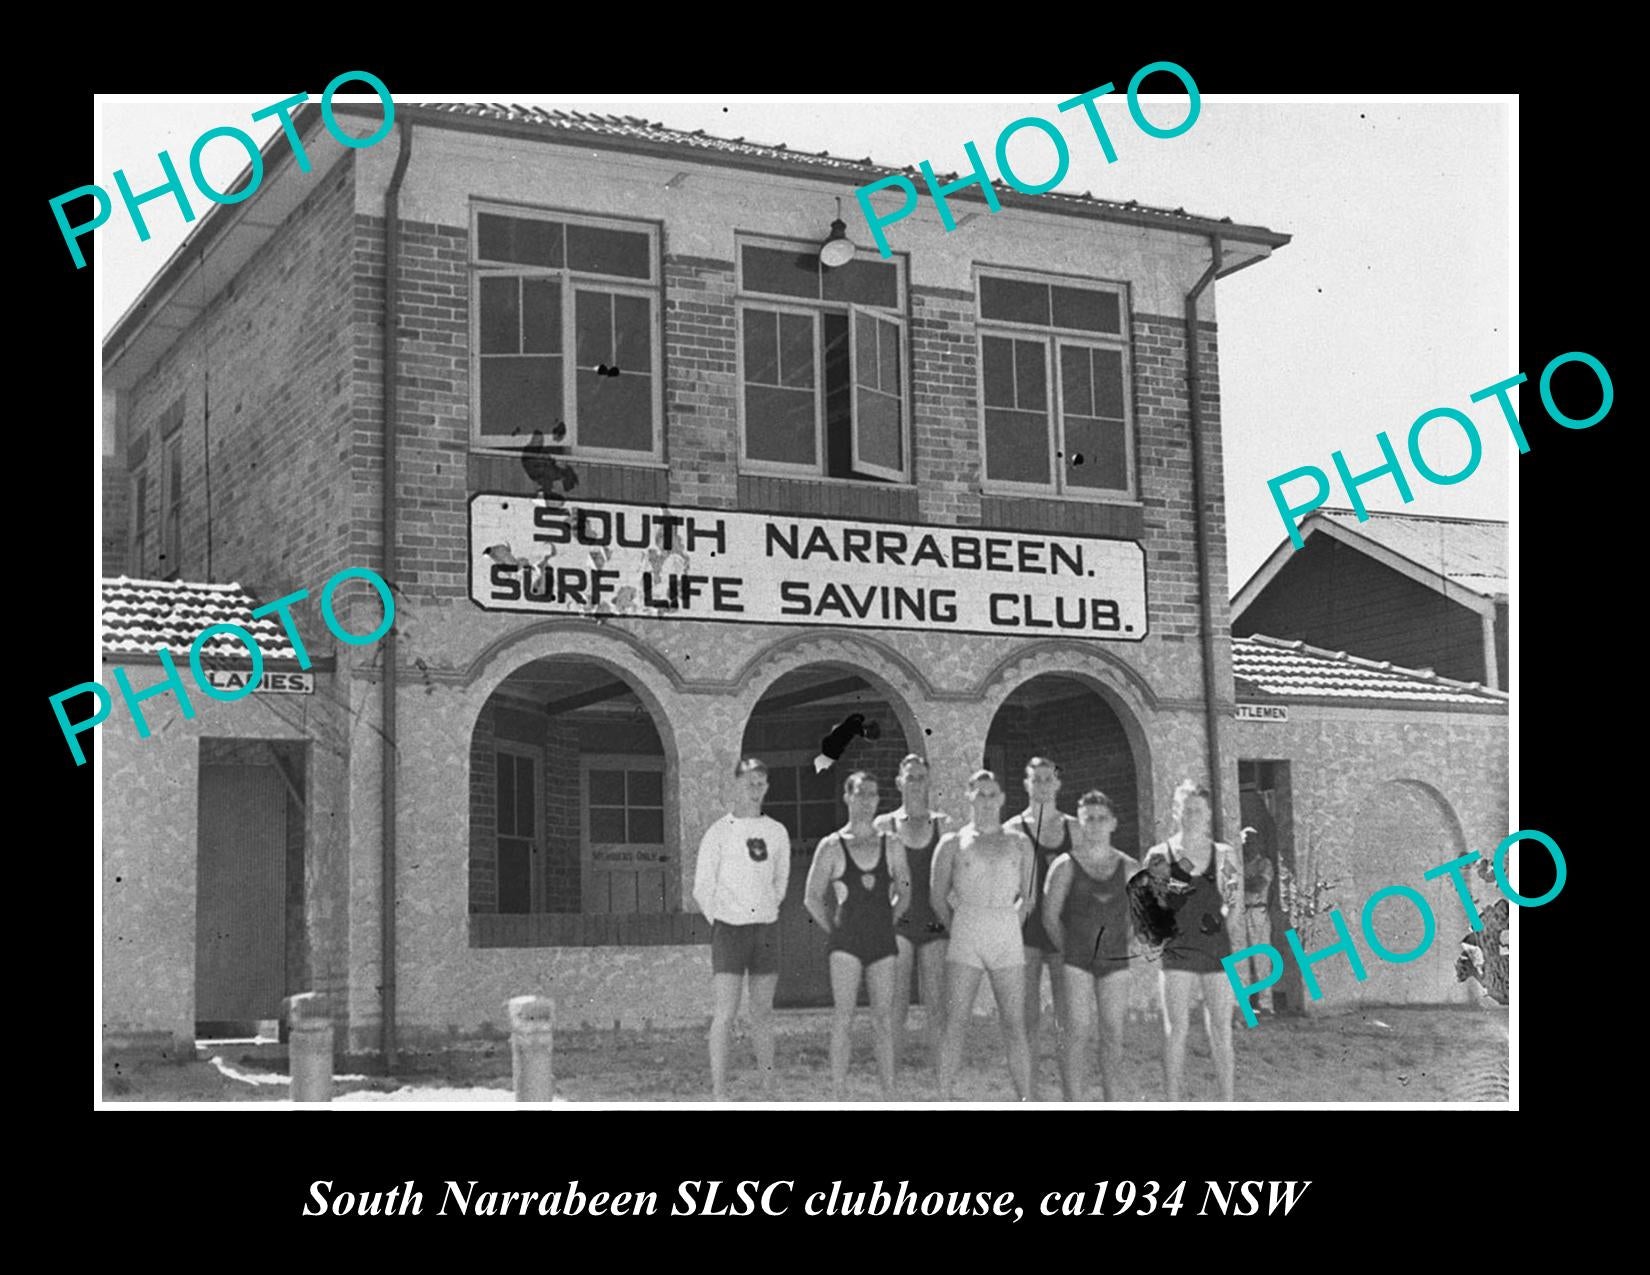 OLD LARGE HISTORIC PHOTO OF SOUTH NARRABEEN SURF LIFE SAVING CLUB HOUSE c1934